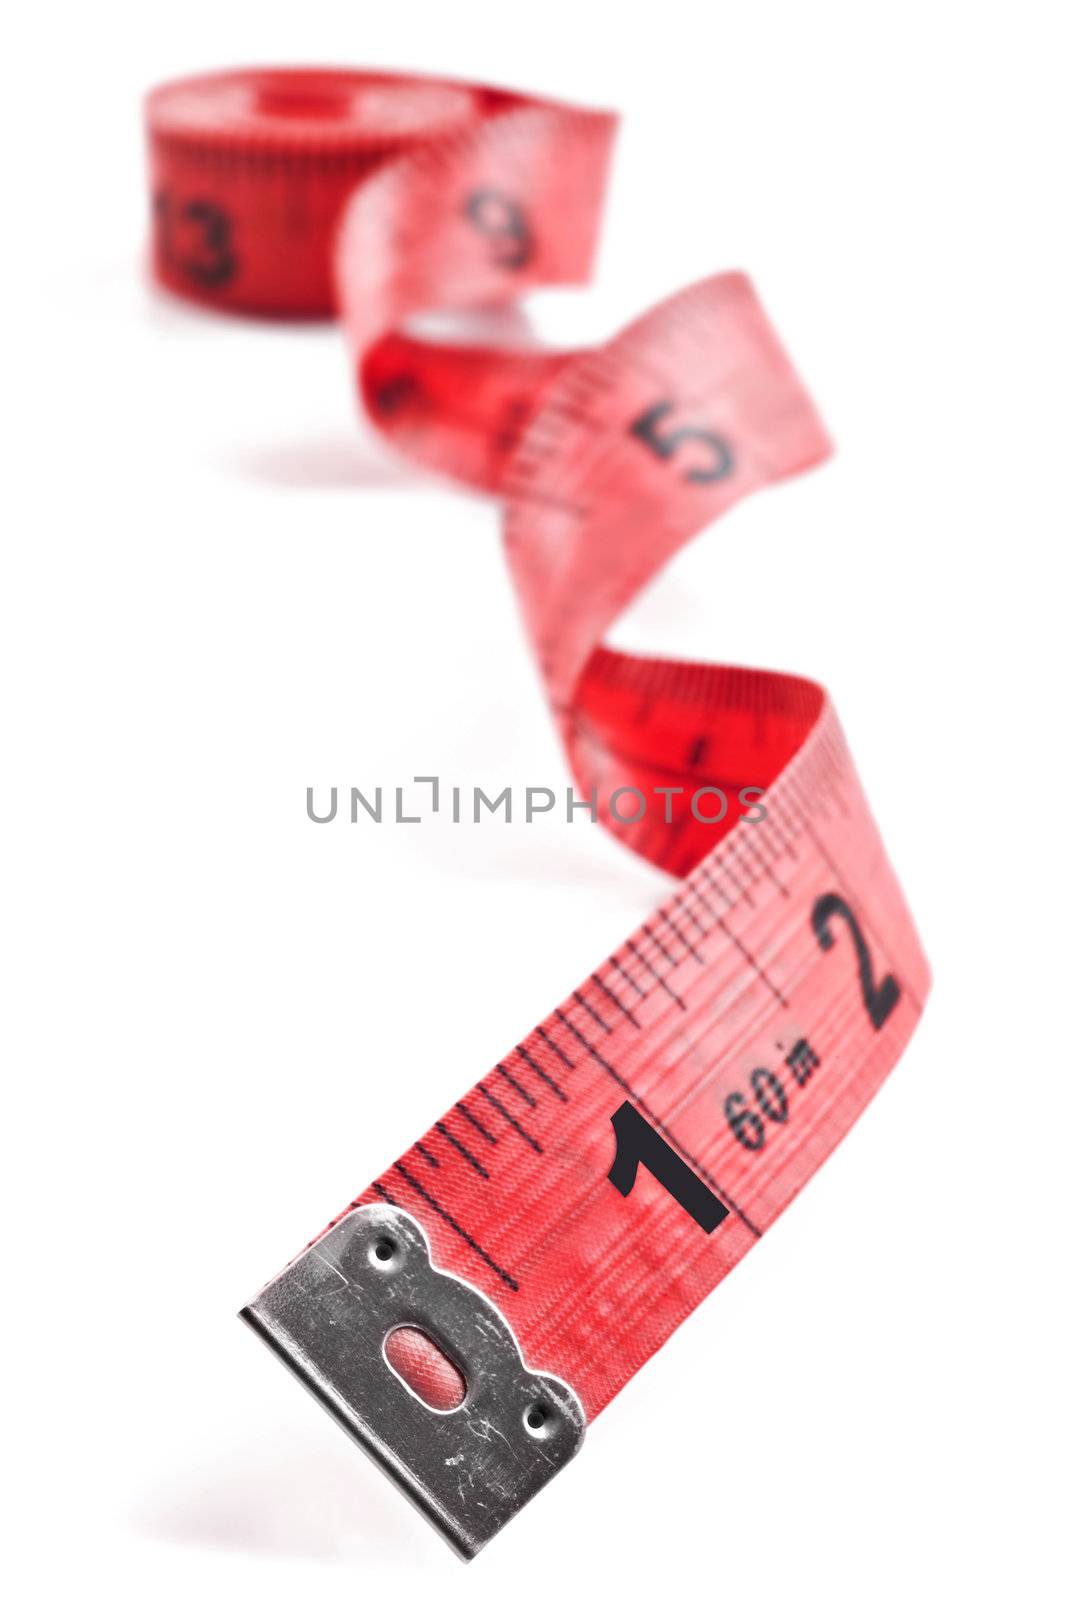 Red tape meassure on rolled up on white background